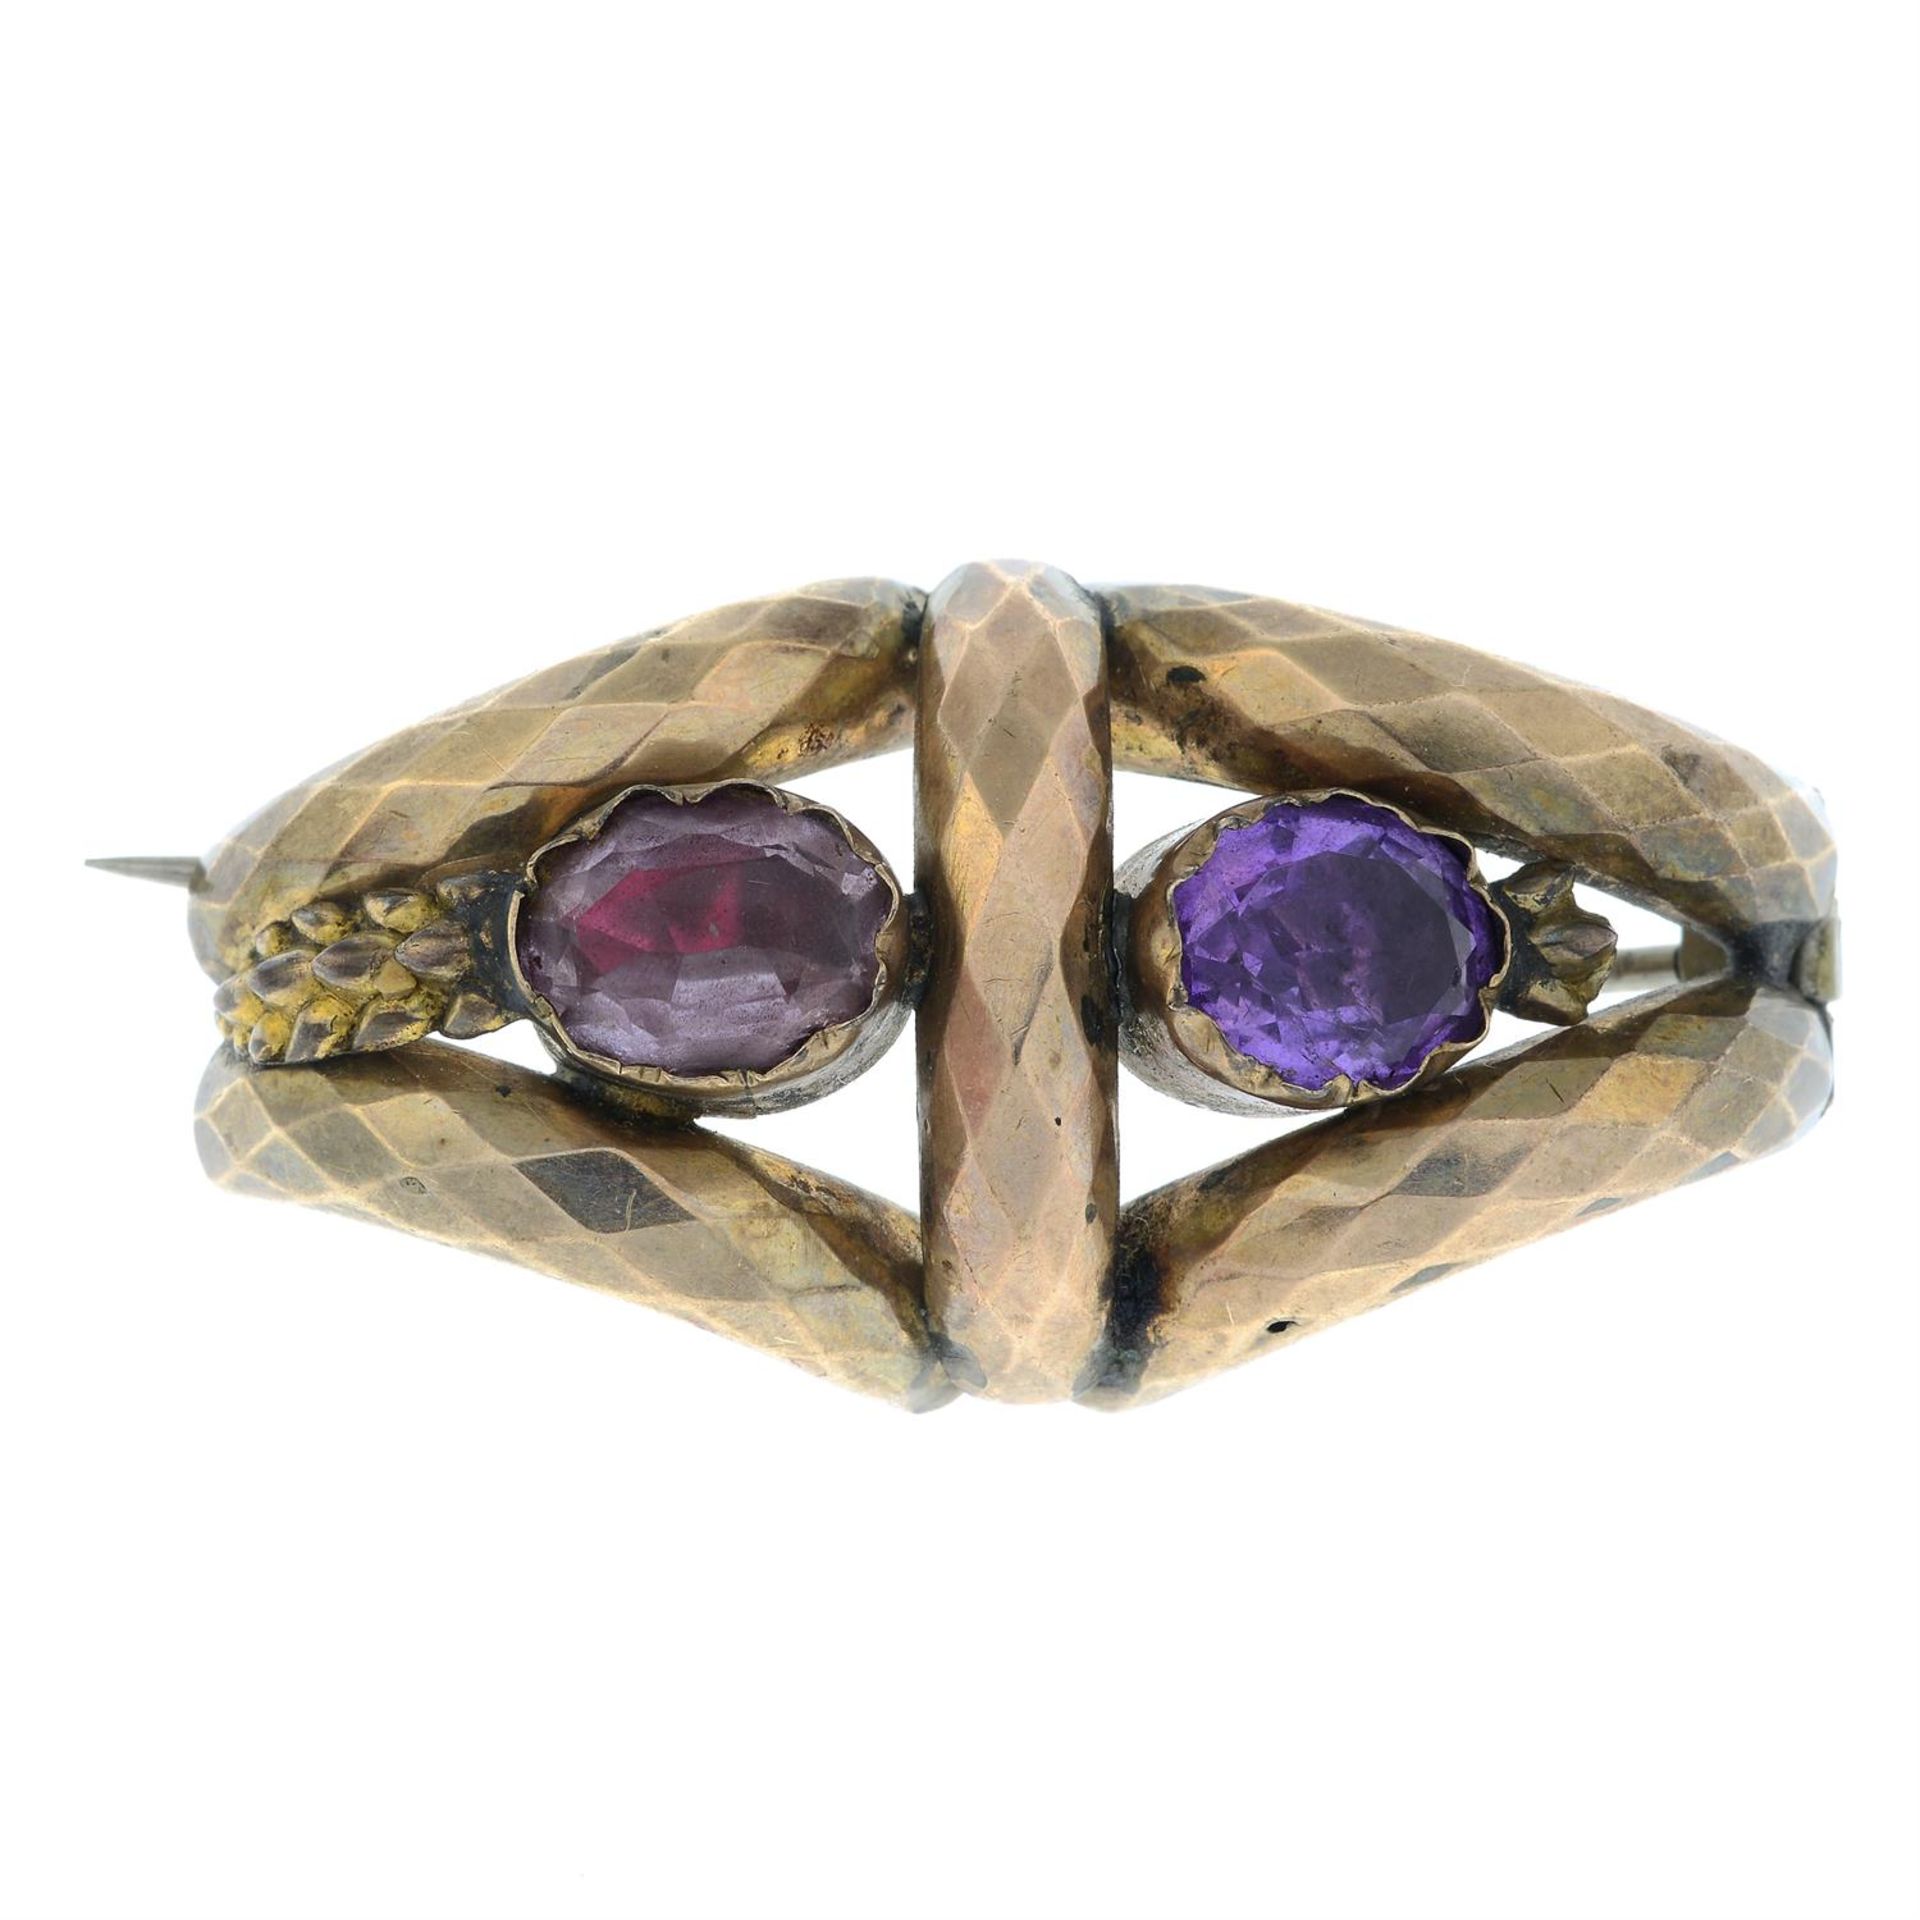 A late 19th century gold foil-back amethyst textured brooch.